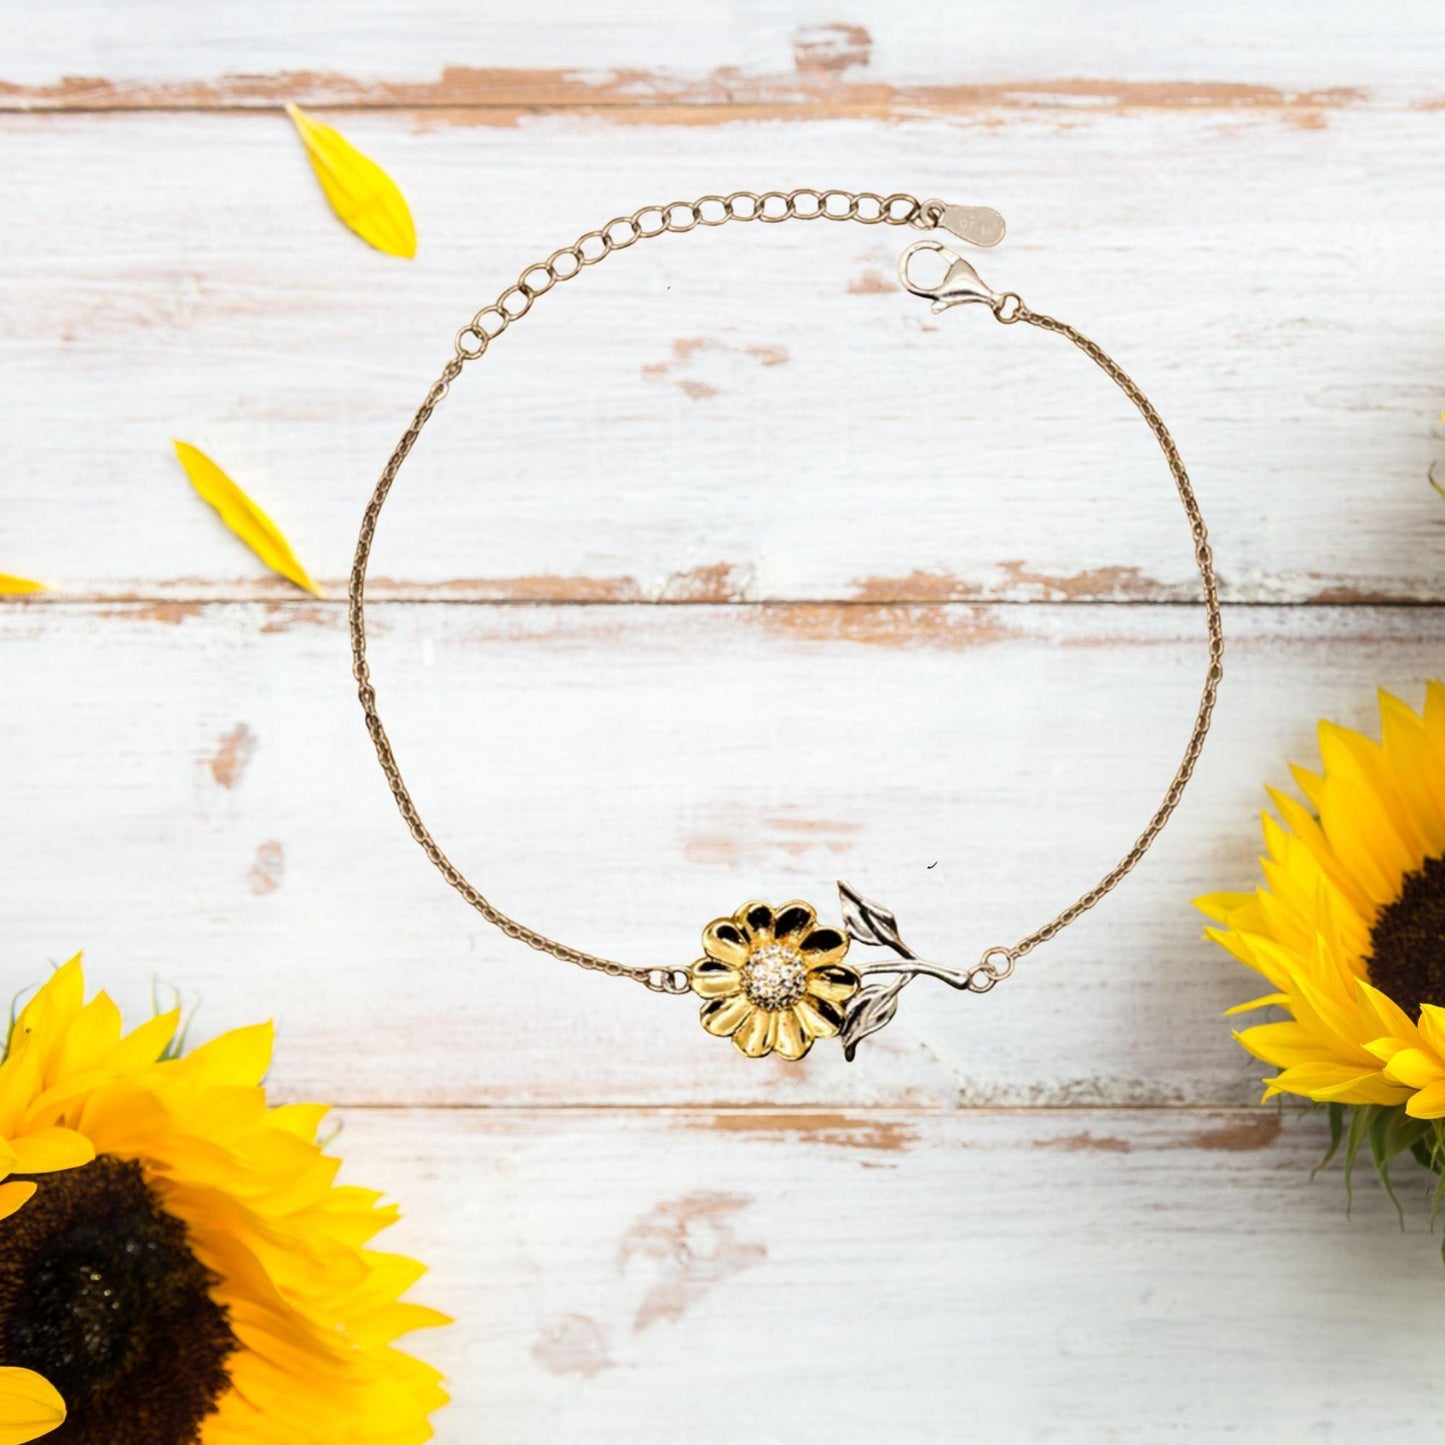 Remarkable Auditor Gifts, Your dedication and hard work, Inspirational Birthday Christmas Unique Sunflower Bracelet For Auditor, Coworkers, Men, Women, Friends - Mallard Moon Gift Shop